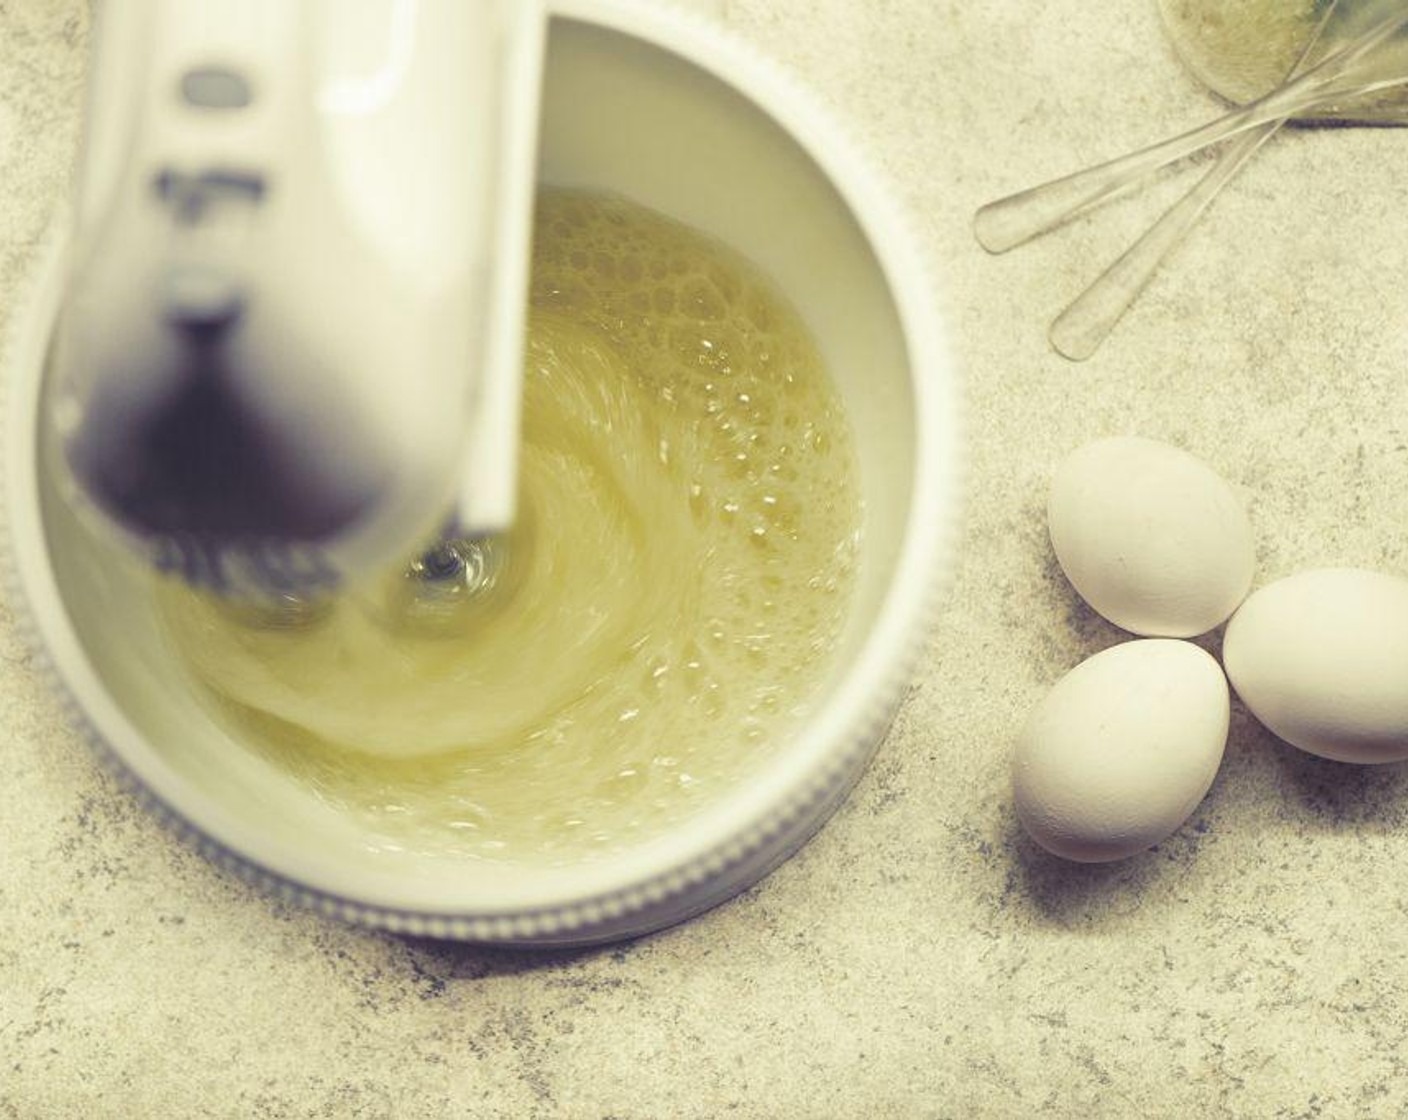 step 2 In a small mixer with a whisk attachment, beat the whites of the Eggs (3) with Cream of Tartar (1/4 tsp).